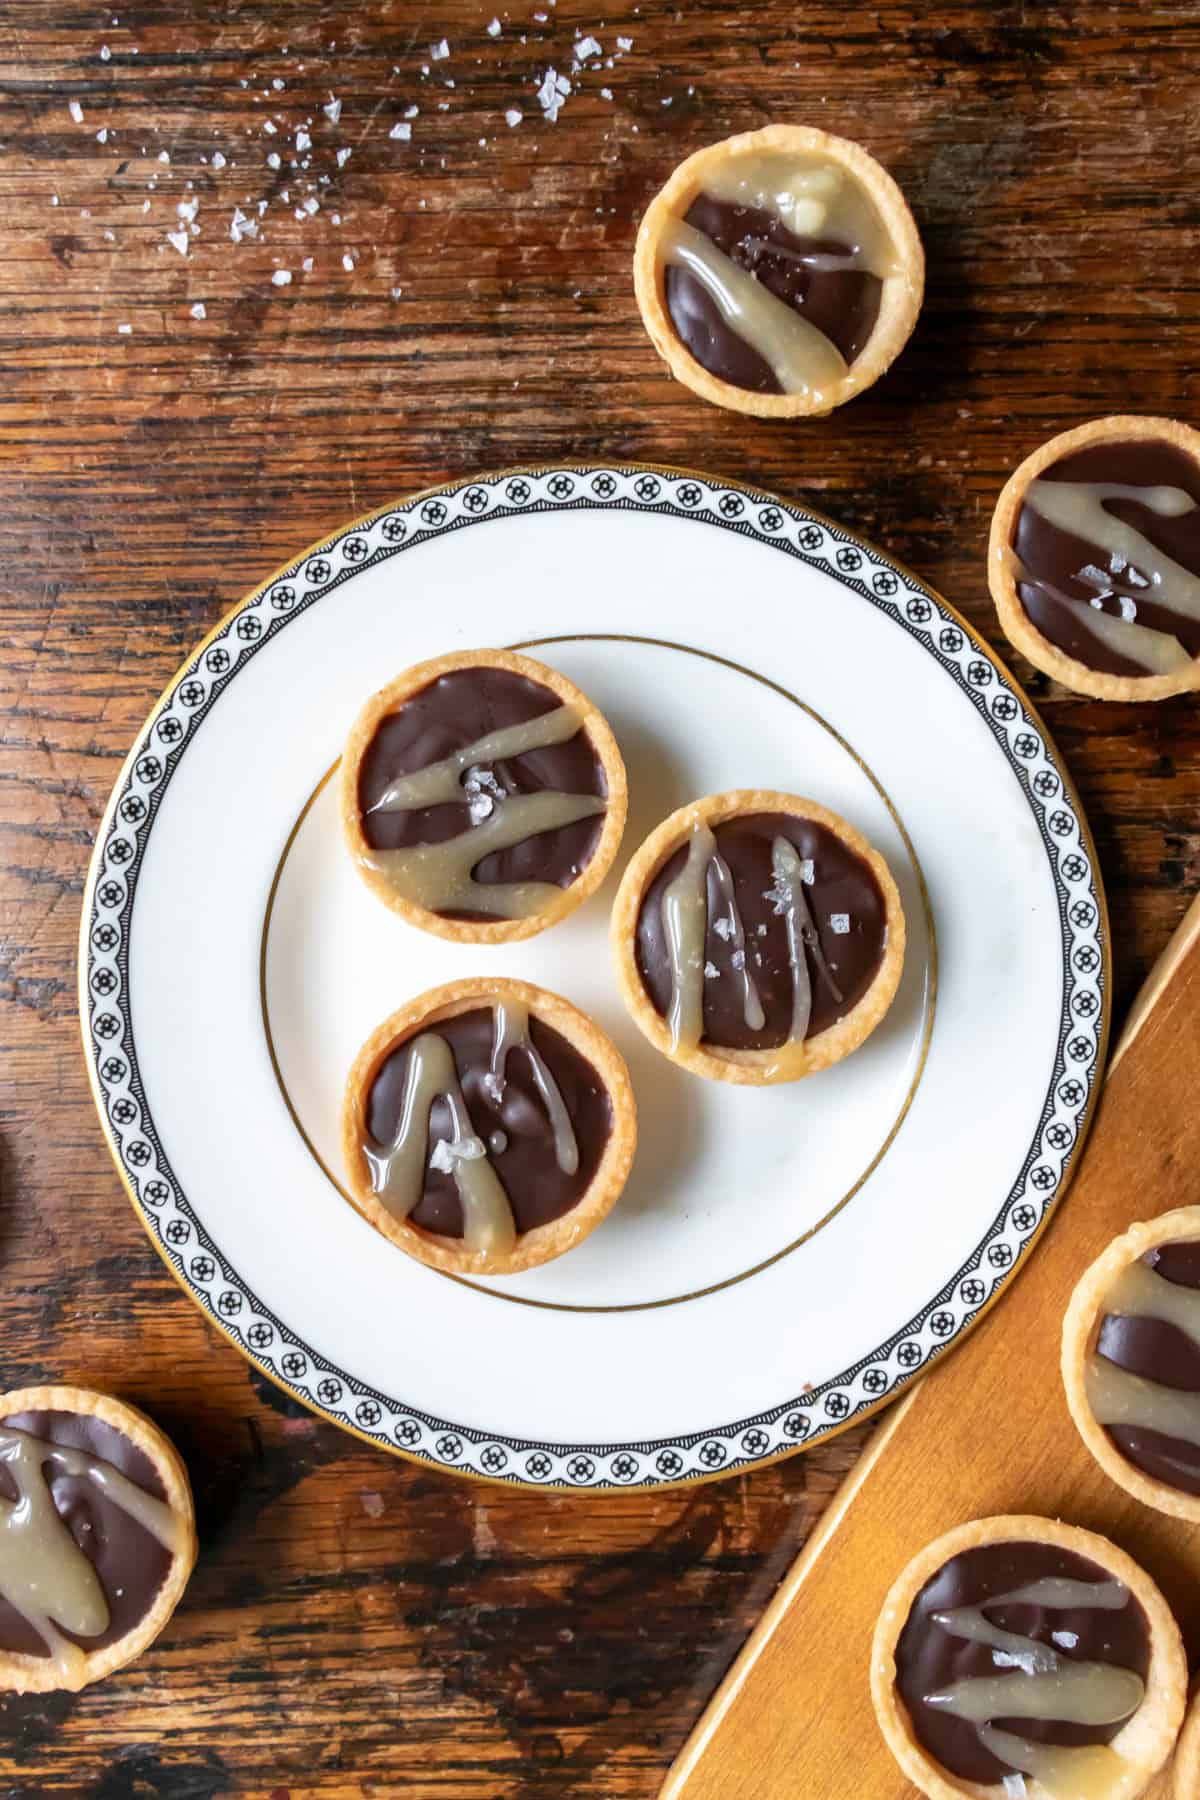 Wooden table with a plate of mini dark chocolate tarts.